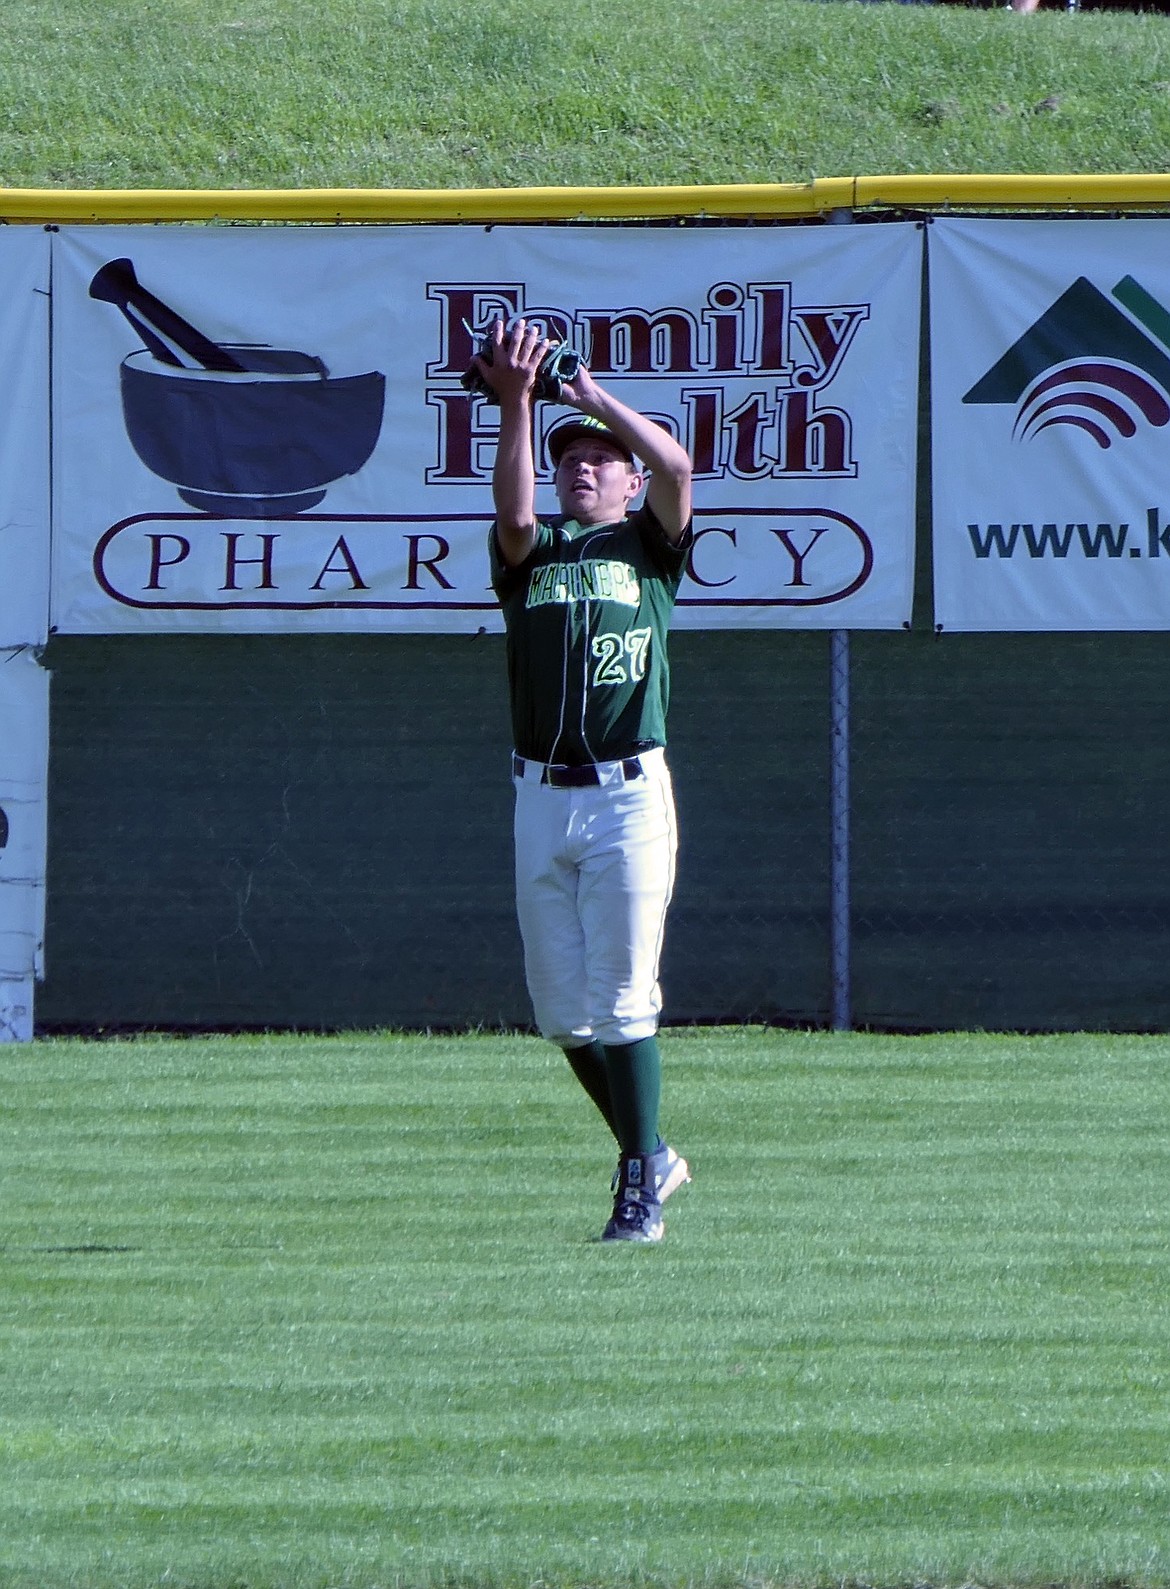 Mission Valley Mariners James Bennett catches a fly ball in a game verses the Missoula Mavericks on Monday, July 13. (Whitney England/Lake County Leader)